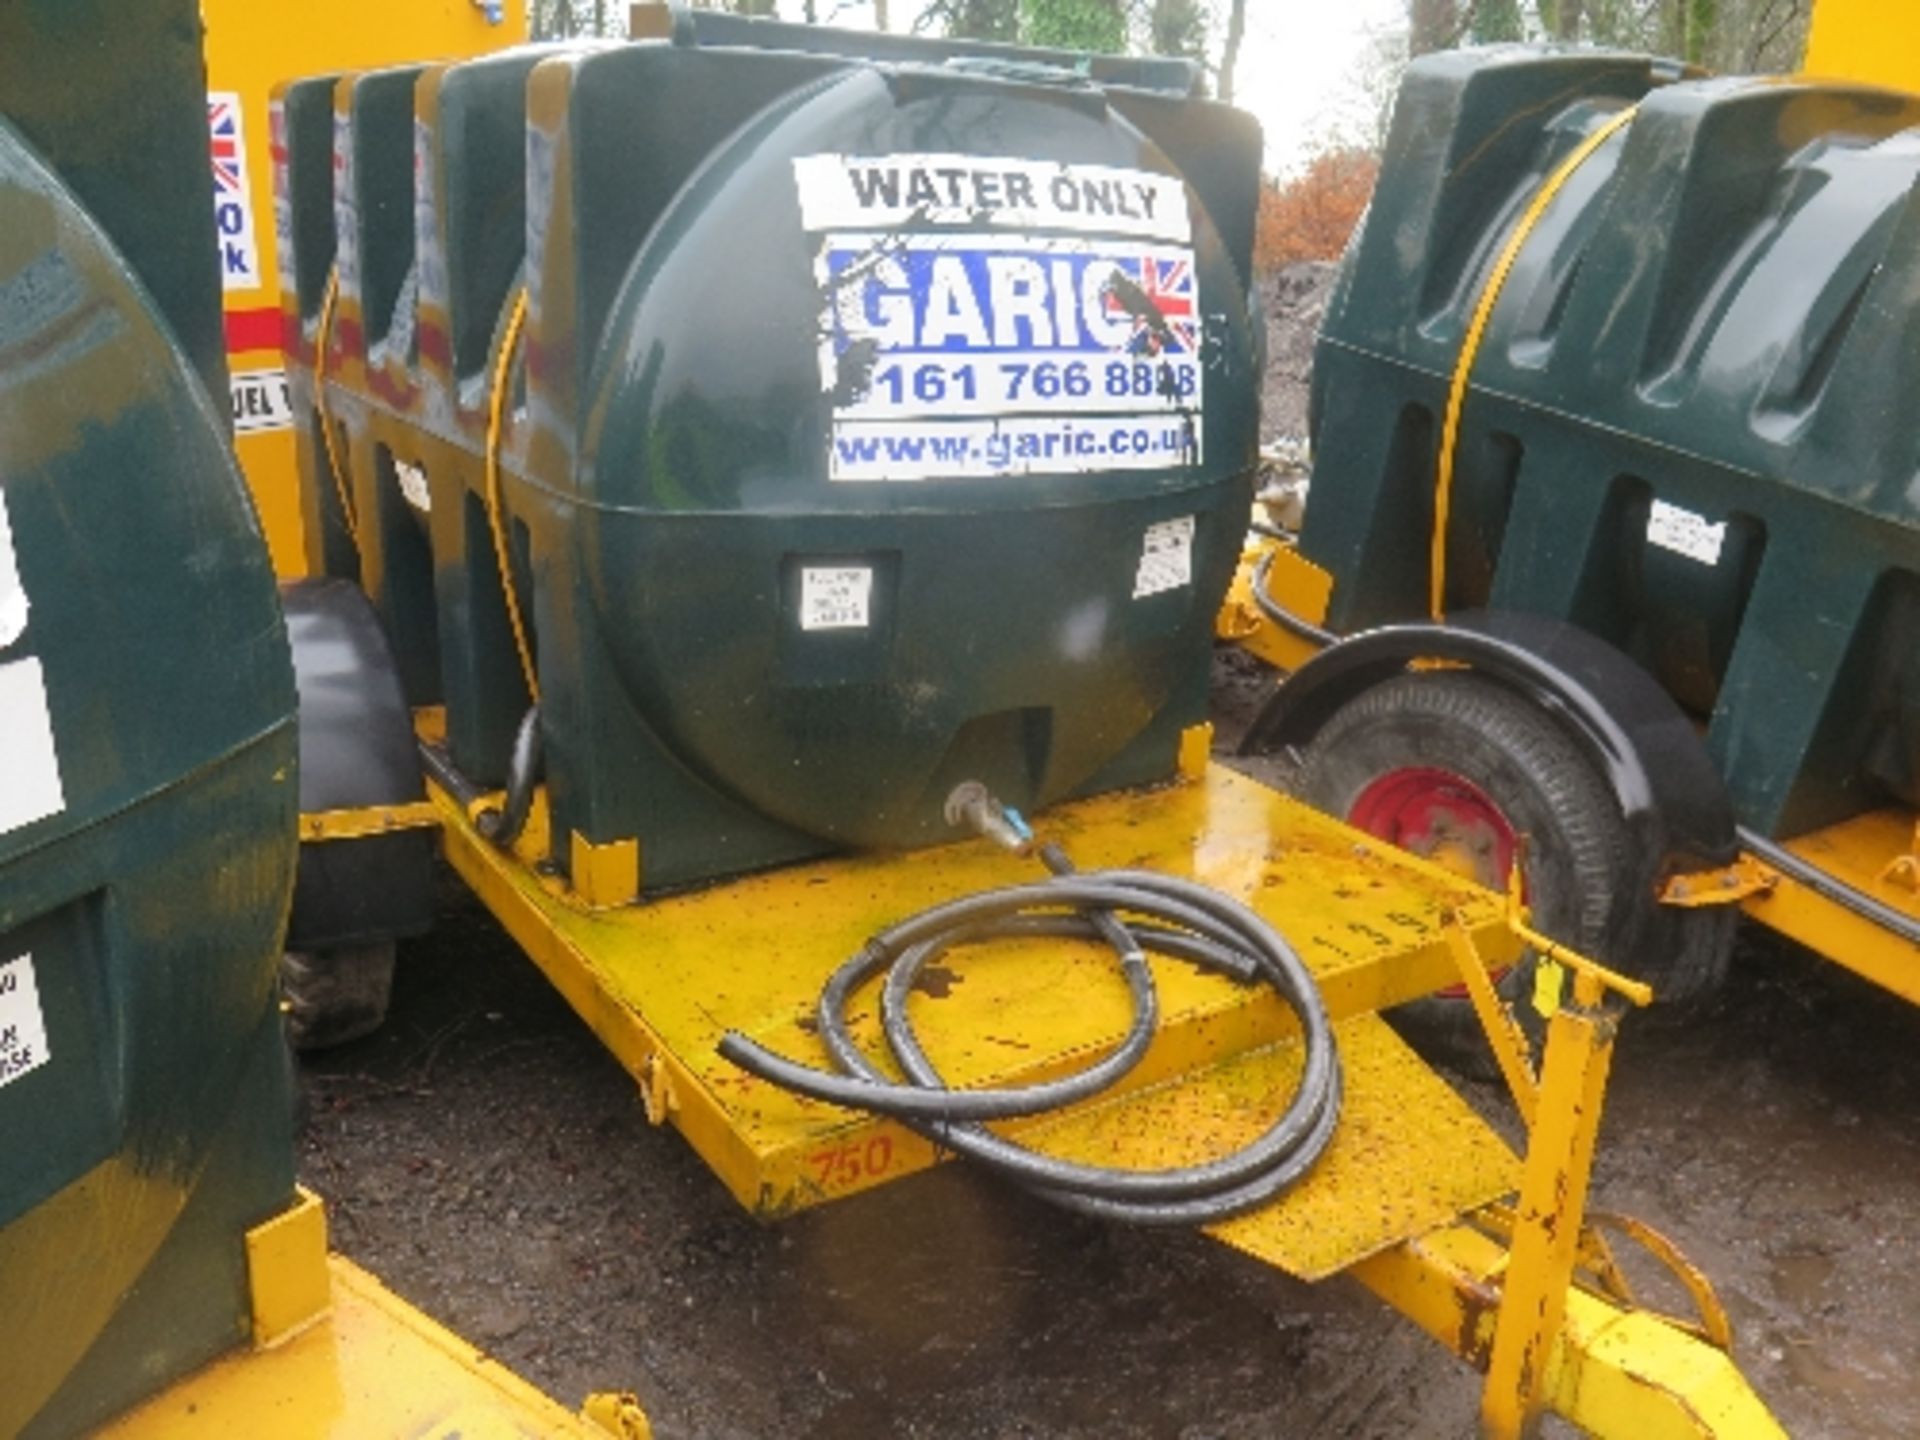 500 gallon site water bowser (11398)